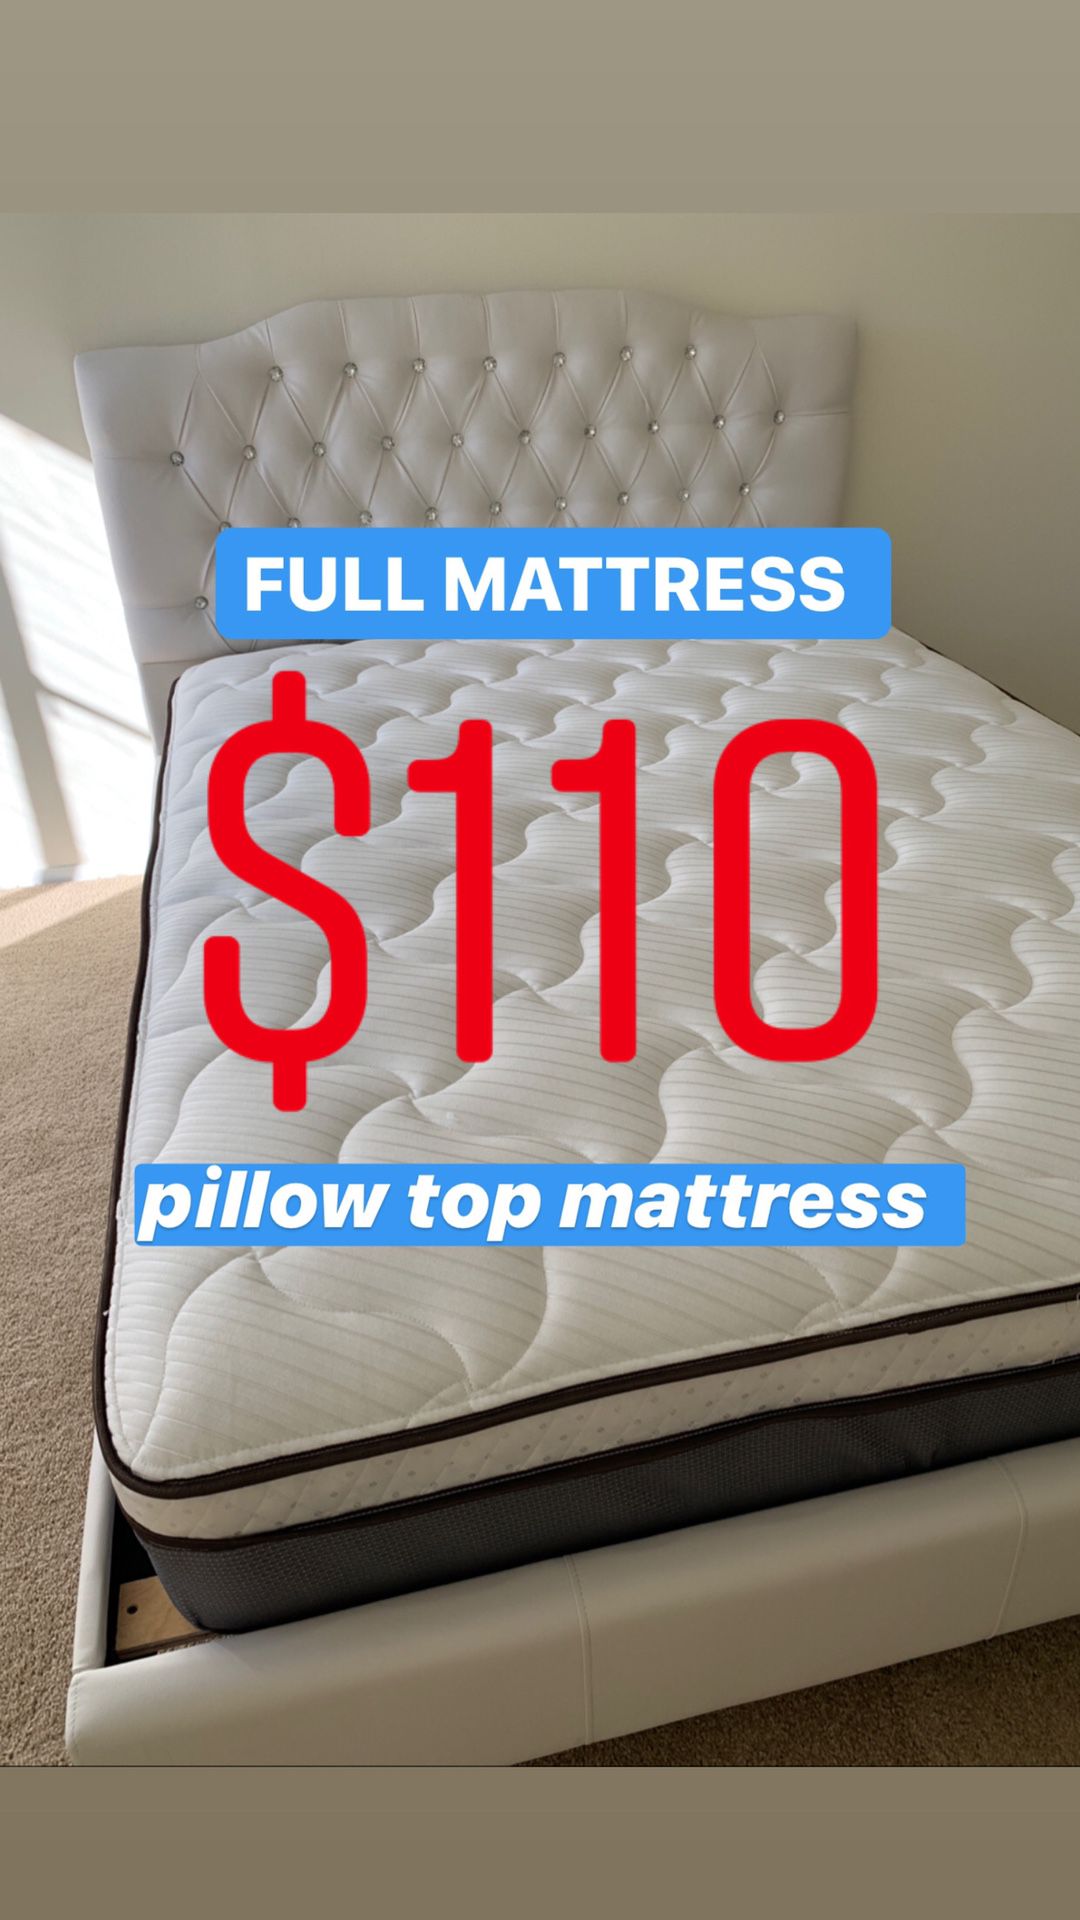 $20 Delivery Fee ‼️ BRAND NEW PILLOW TOP MATTRESSES💯 COLCHONES NUEVOS PILLOW TOP 💯 Queen $120 ❌ $180 With Box Spring 💥💥 FULL SIZE $110 ❌ $160 Wit